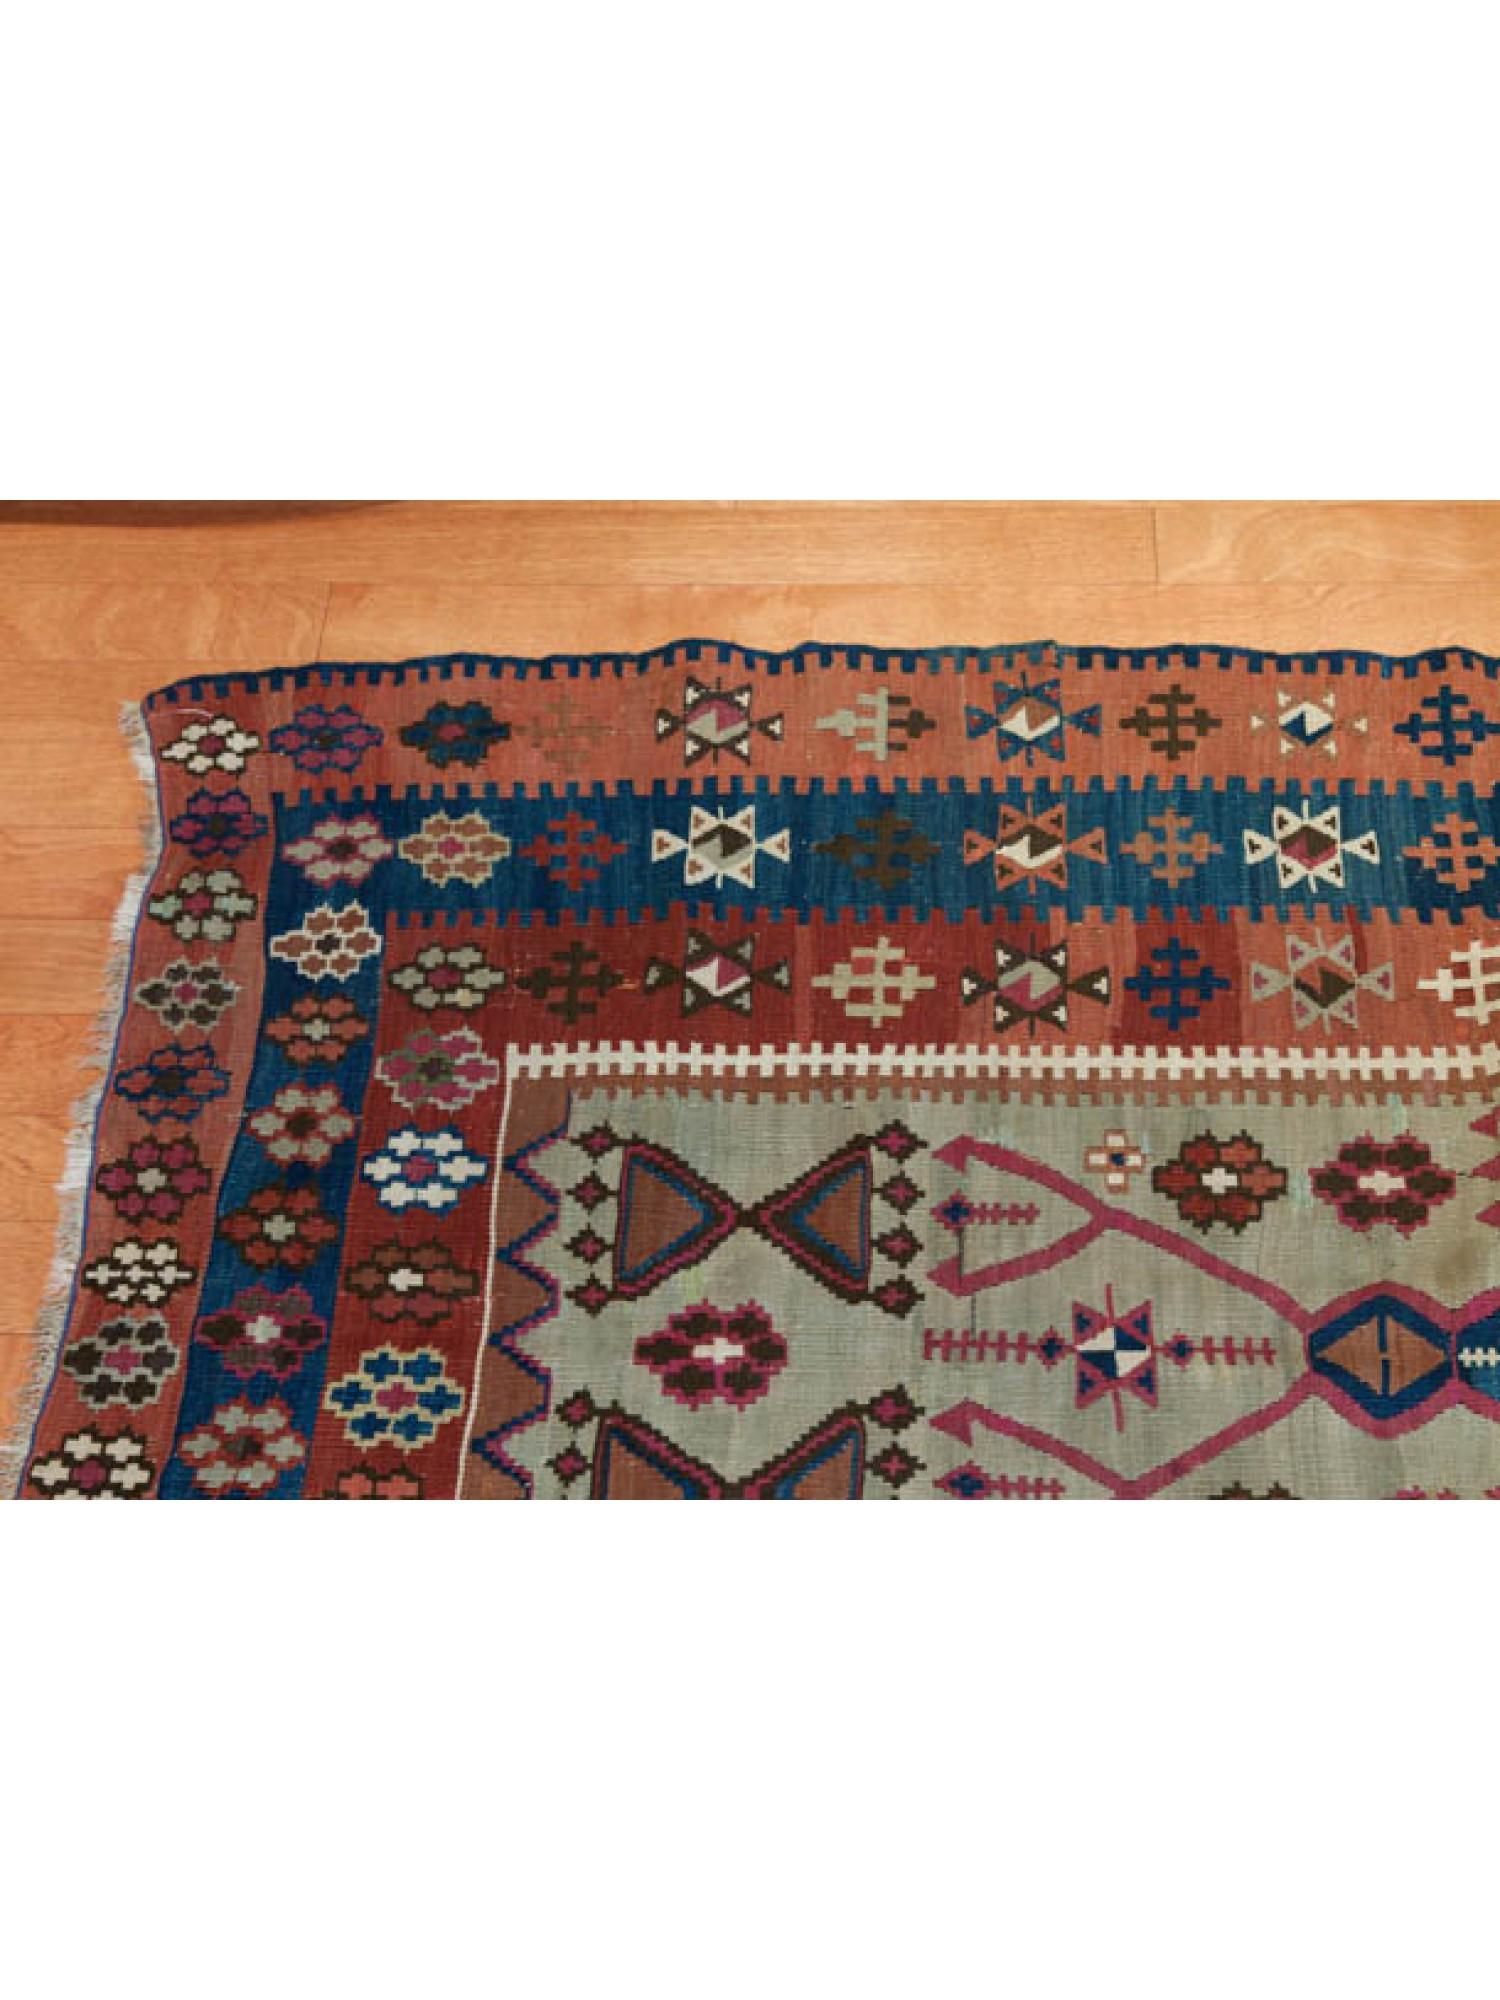 This is an Anatolian Old Kilim with a rare design.
The combination of blue and brown is a chic and fashionable color scheme even today. These two colors have a good gradation and abrush of each color.
There are shades of brown, reddish and mocha